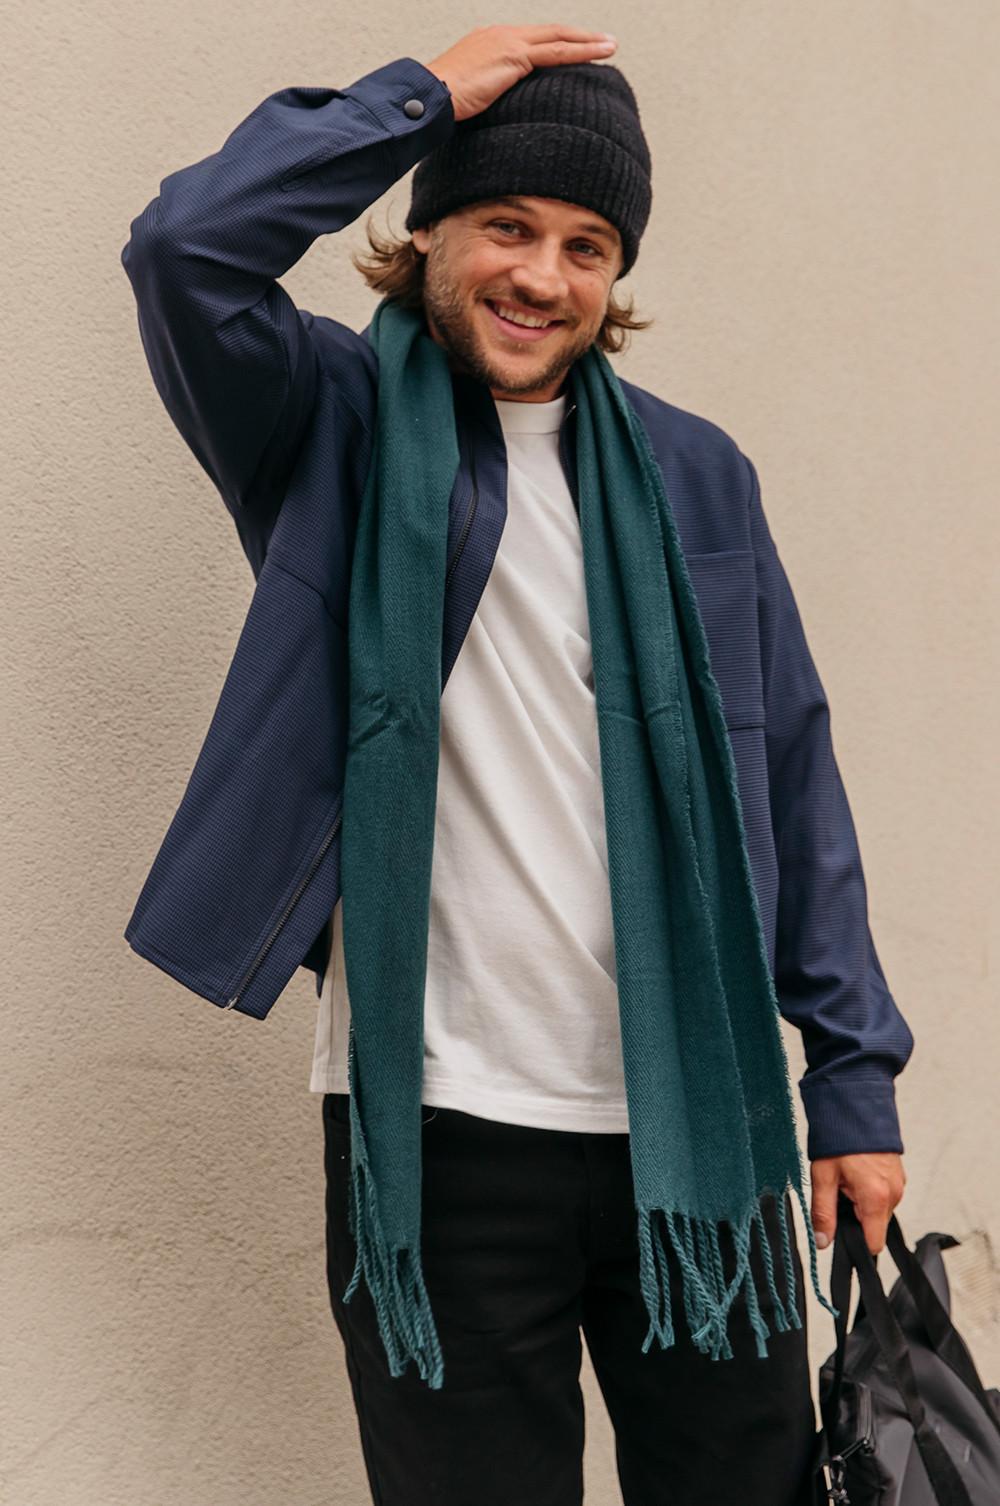 Primark Men's Scarves & Thermals new collection